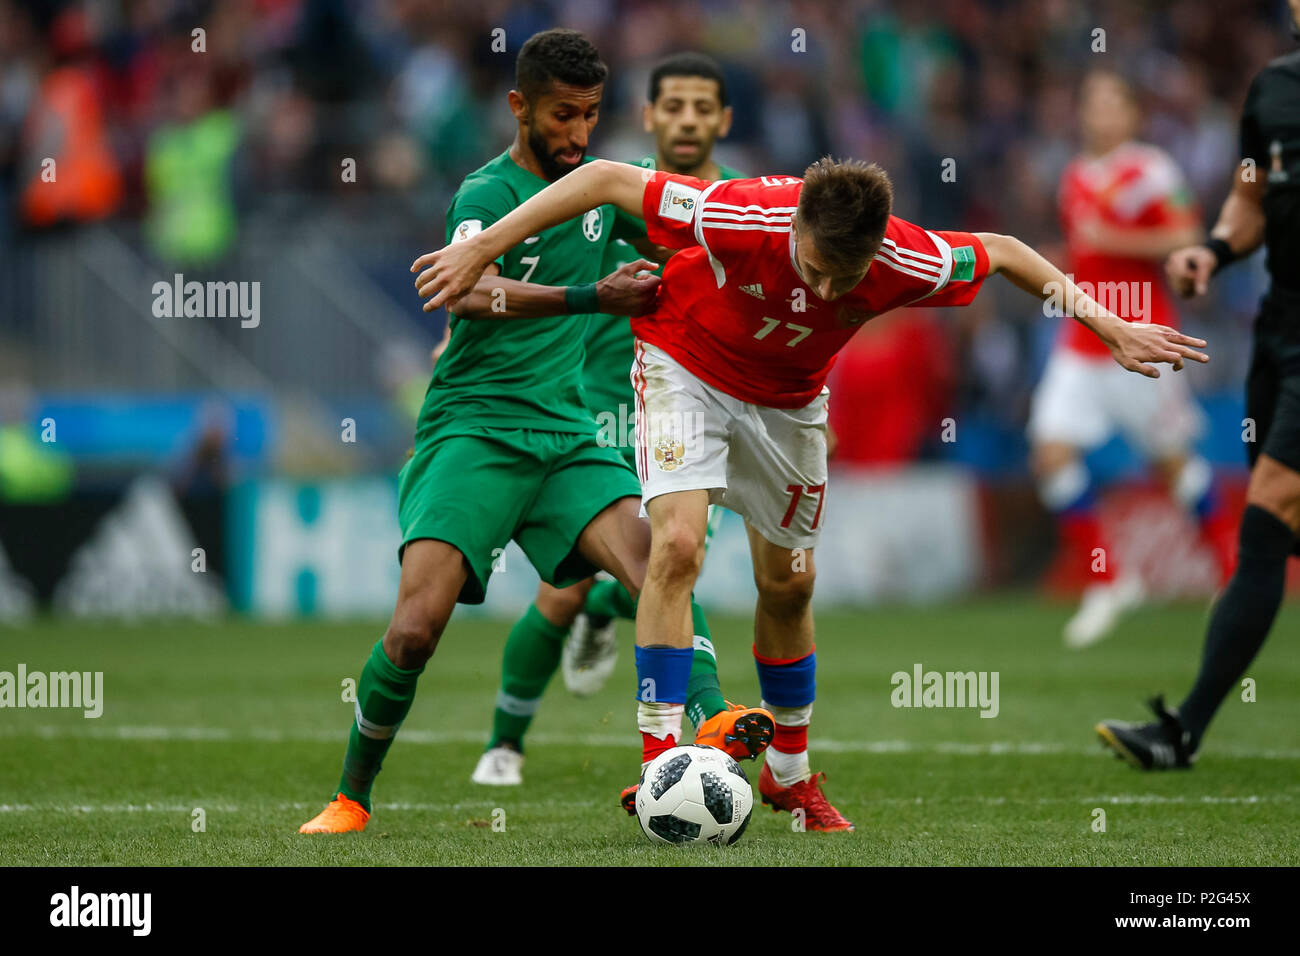 Moscow, Russia. 14th June 2018. Salman Al-Faraj of Saudi Arabia and Aleksandr Golovin of Russia during the 2018 FIFA World Cup Group A match between Russia and Saudi Arabia at Luzhniki Stadium on June 14th 2018 in Moscow, Russia. Credit: PHC Images/Alamy Live News Stock Photo